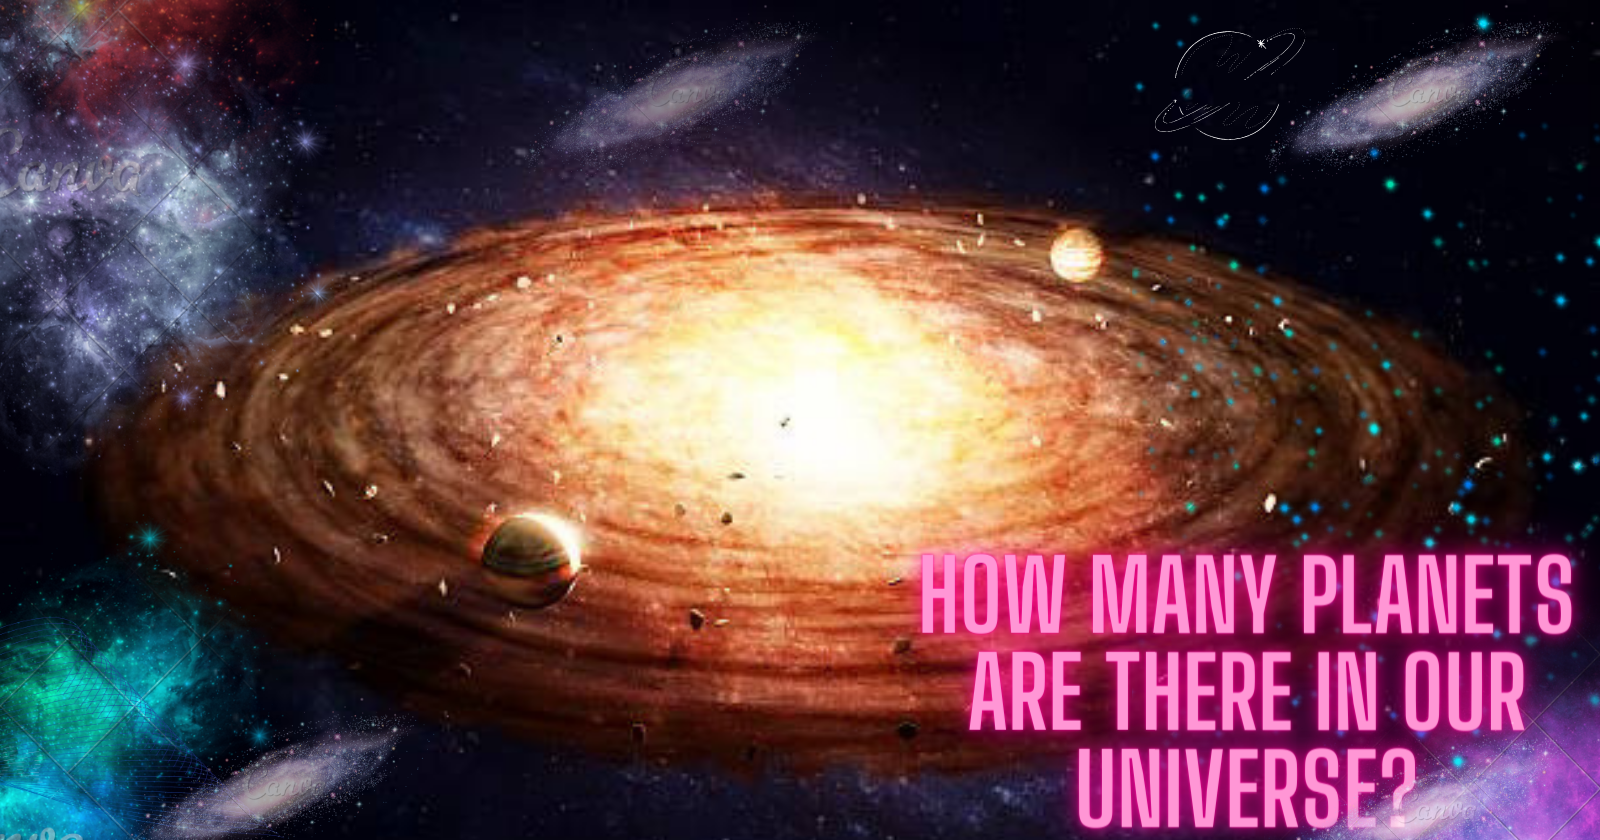 How many planets are there in our universe?